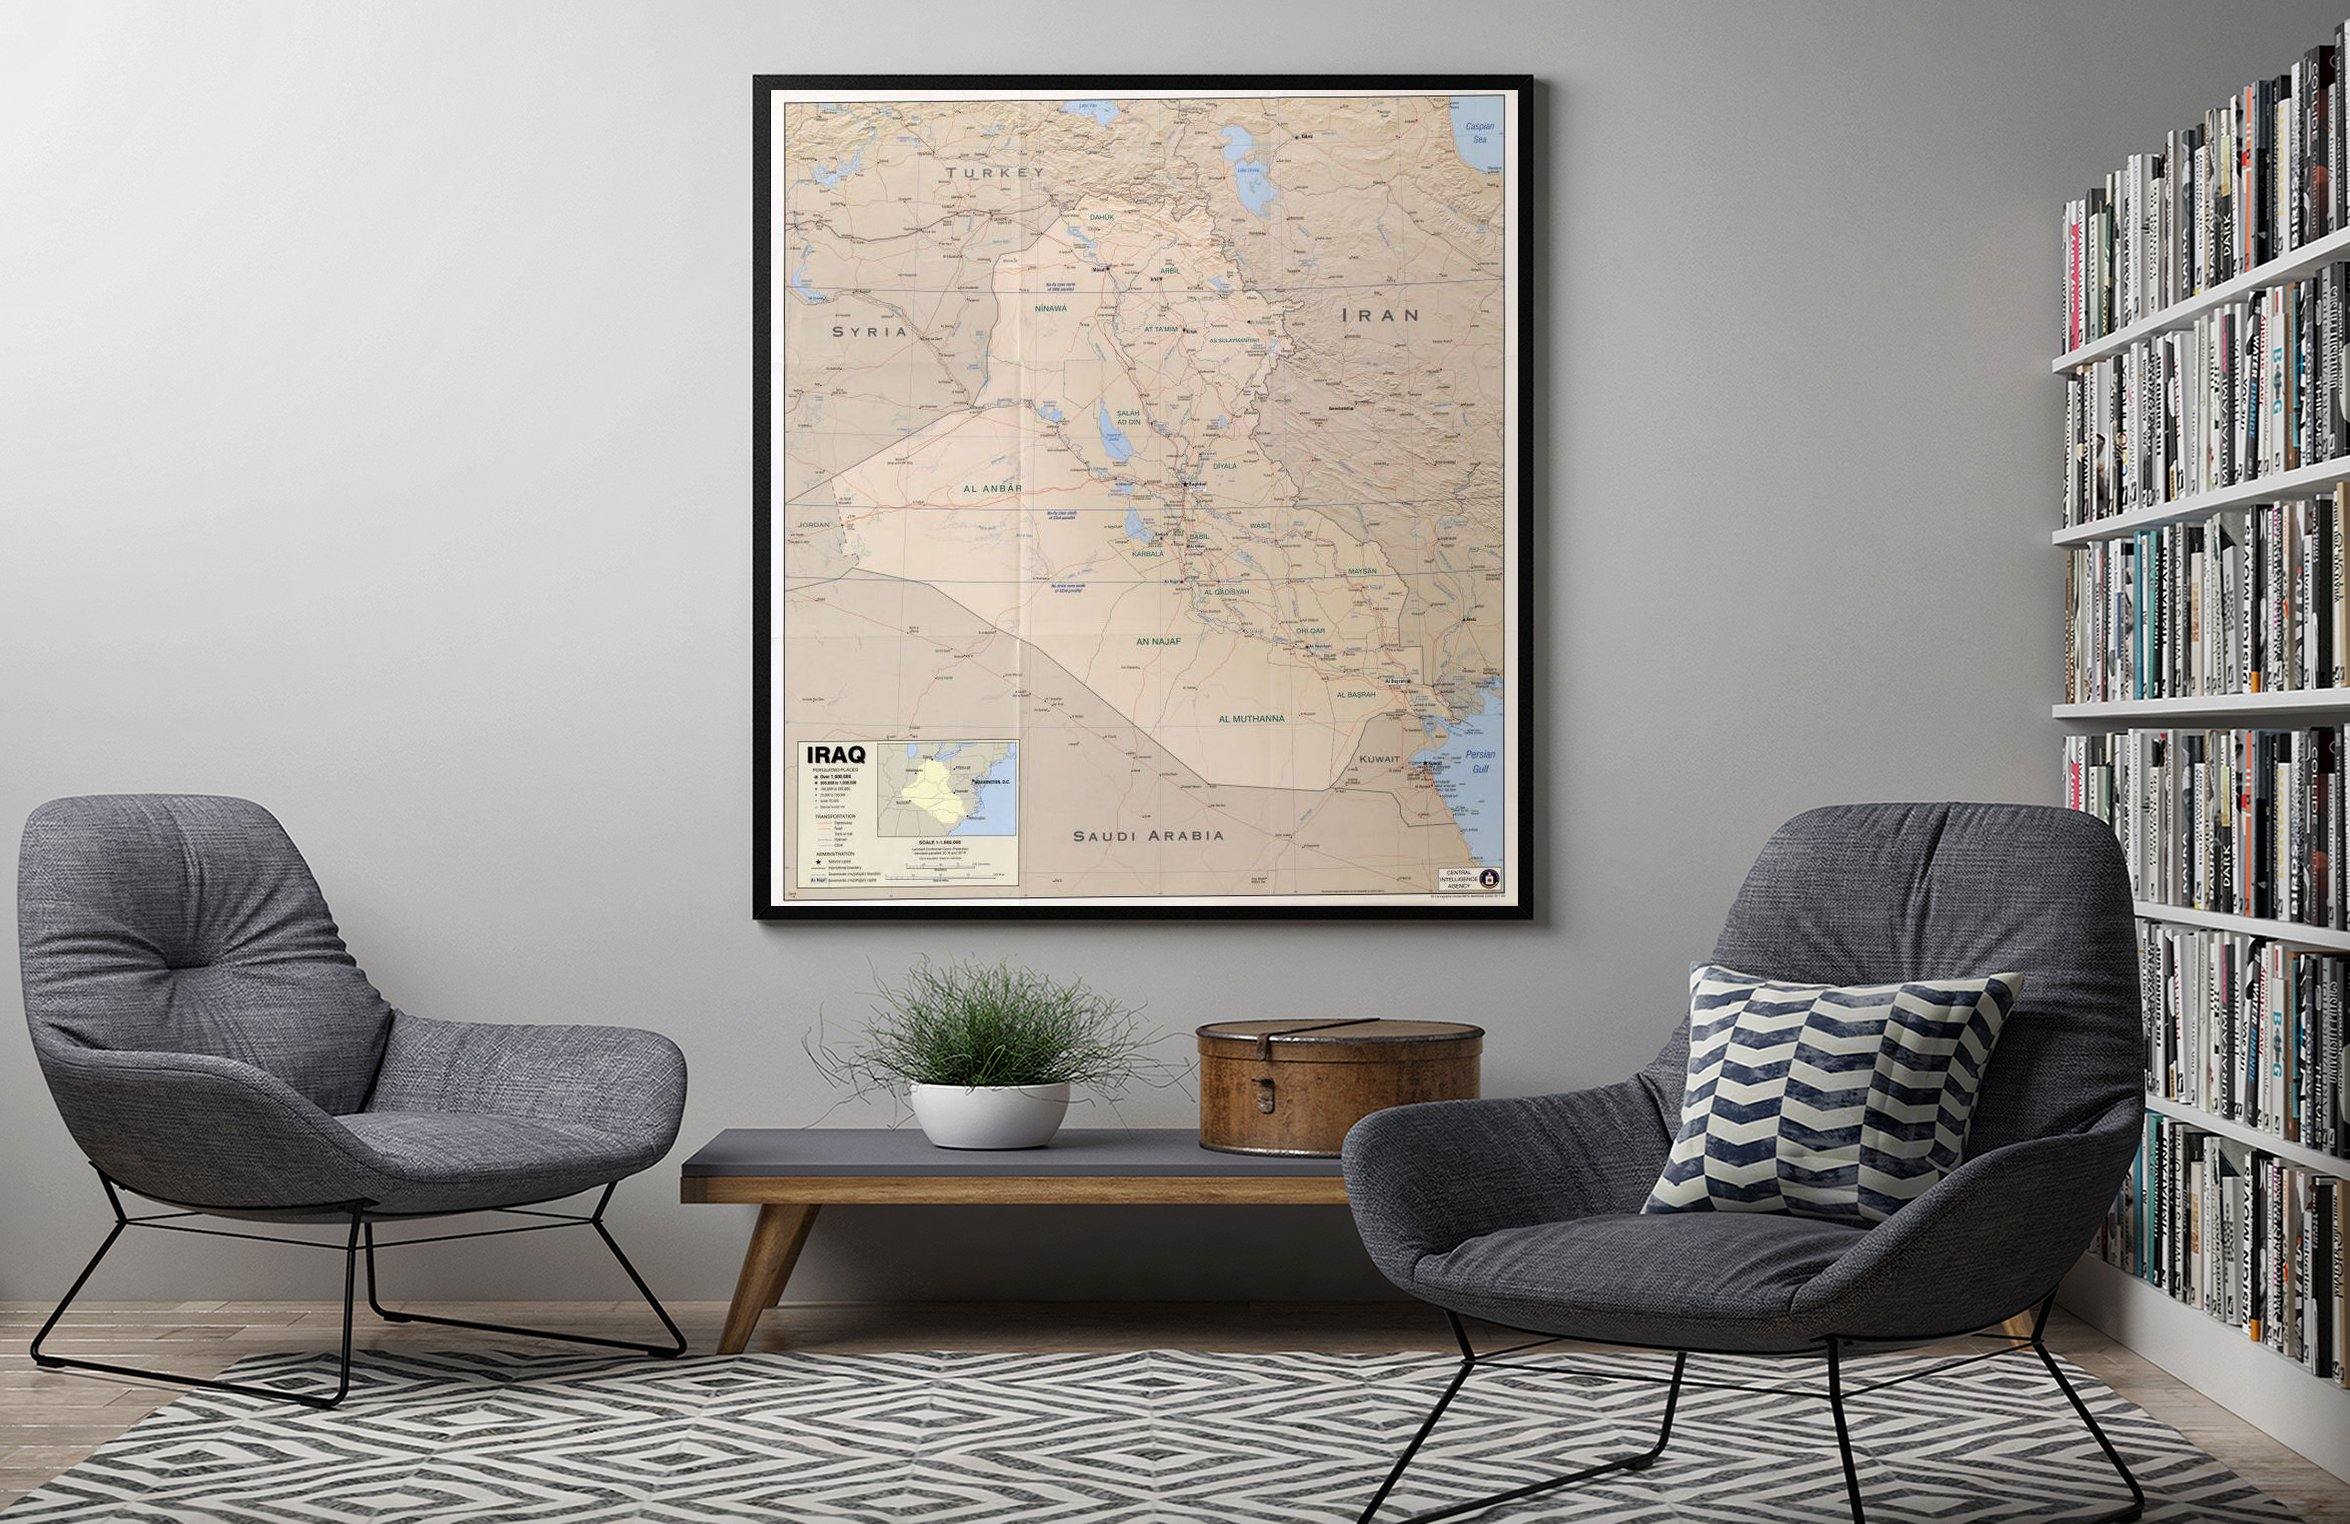 2003 Map| Iraq| Iraq Map Size: 22 inches x 24 inches |Fits 22x24 size - New York Map Company